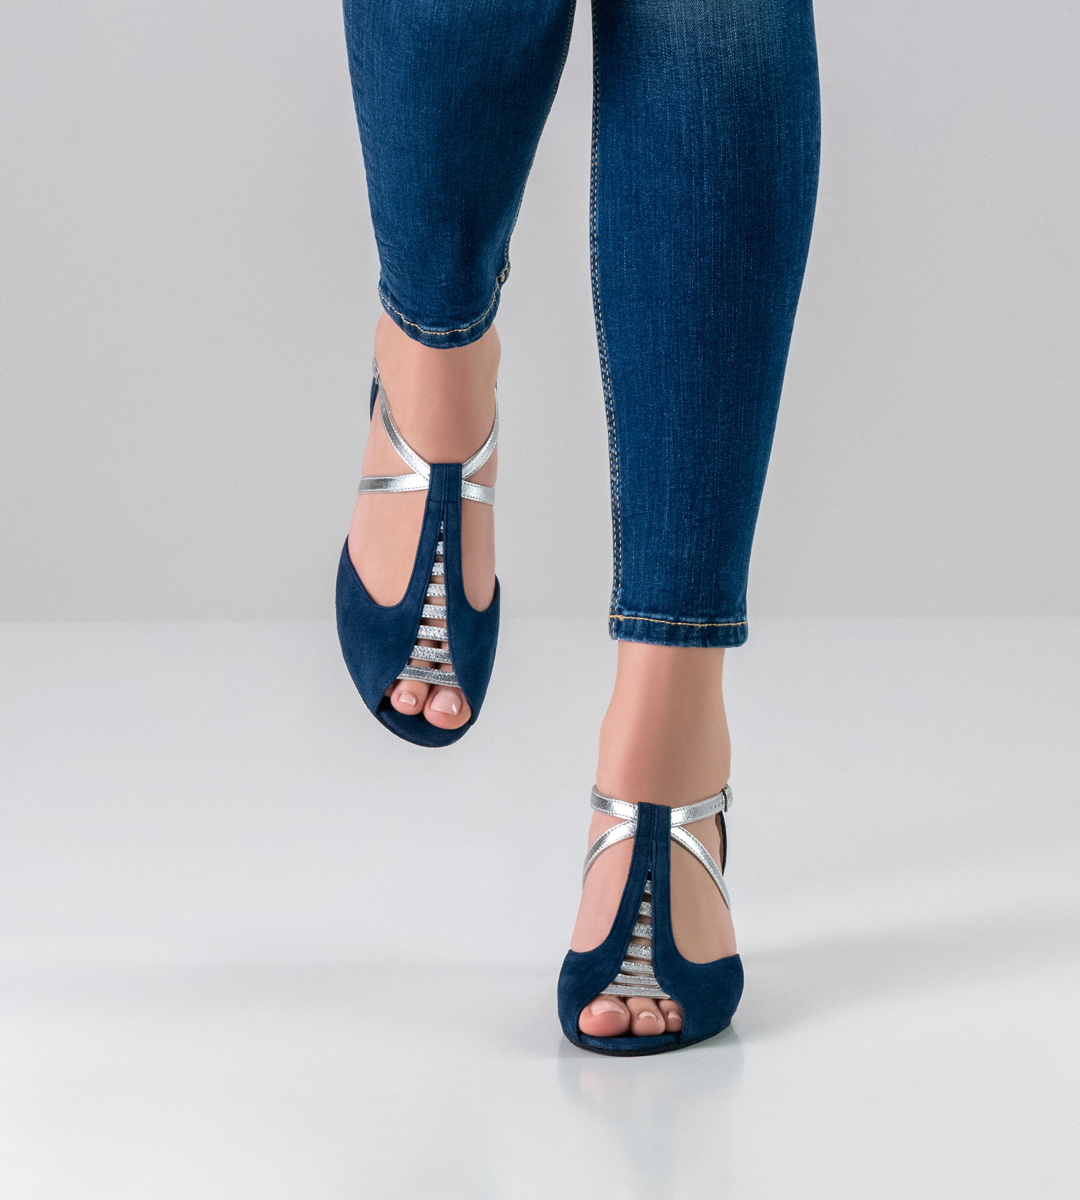 Werner Kern open-toe ladies' dance shoe with 5.5 cm heel height in combination with blue jeans